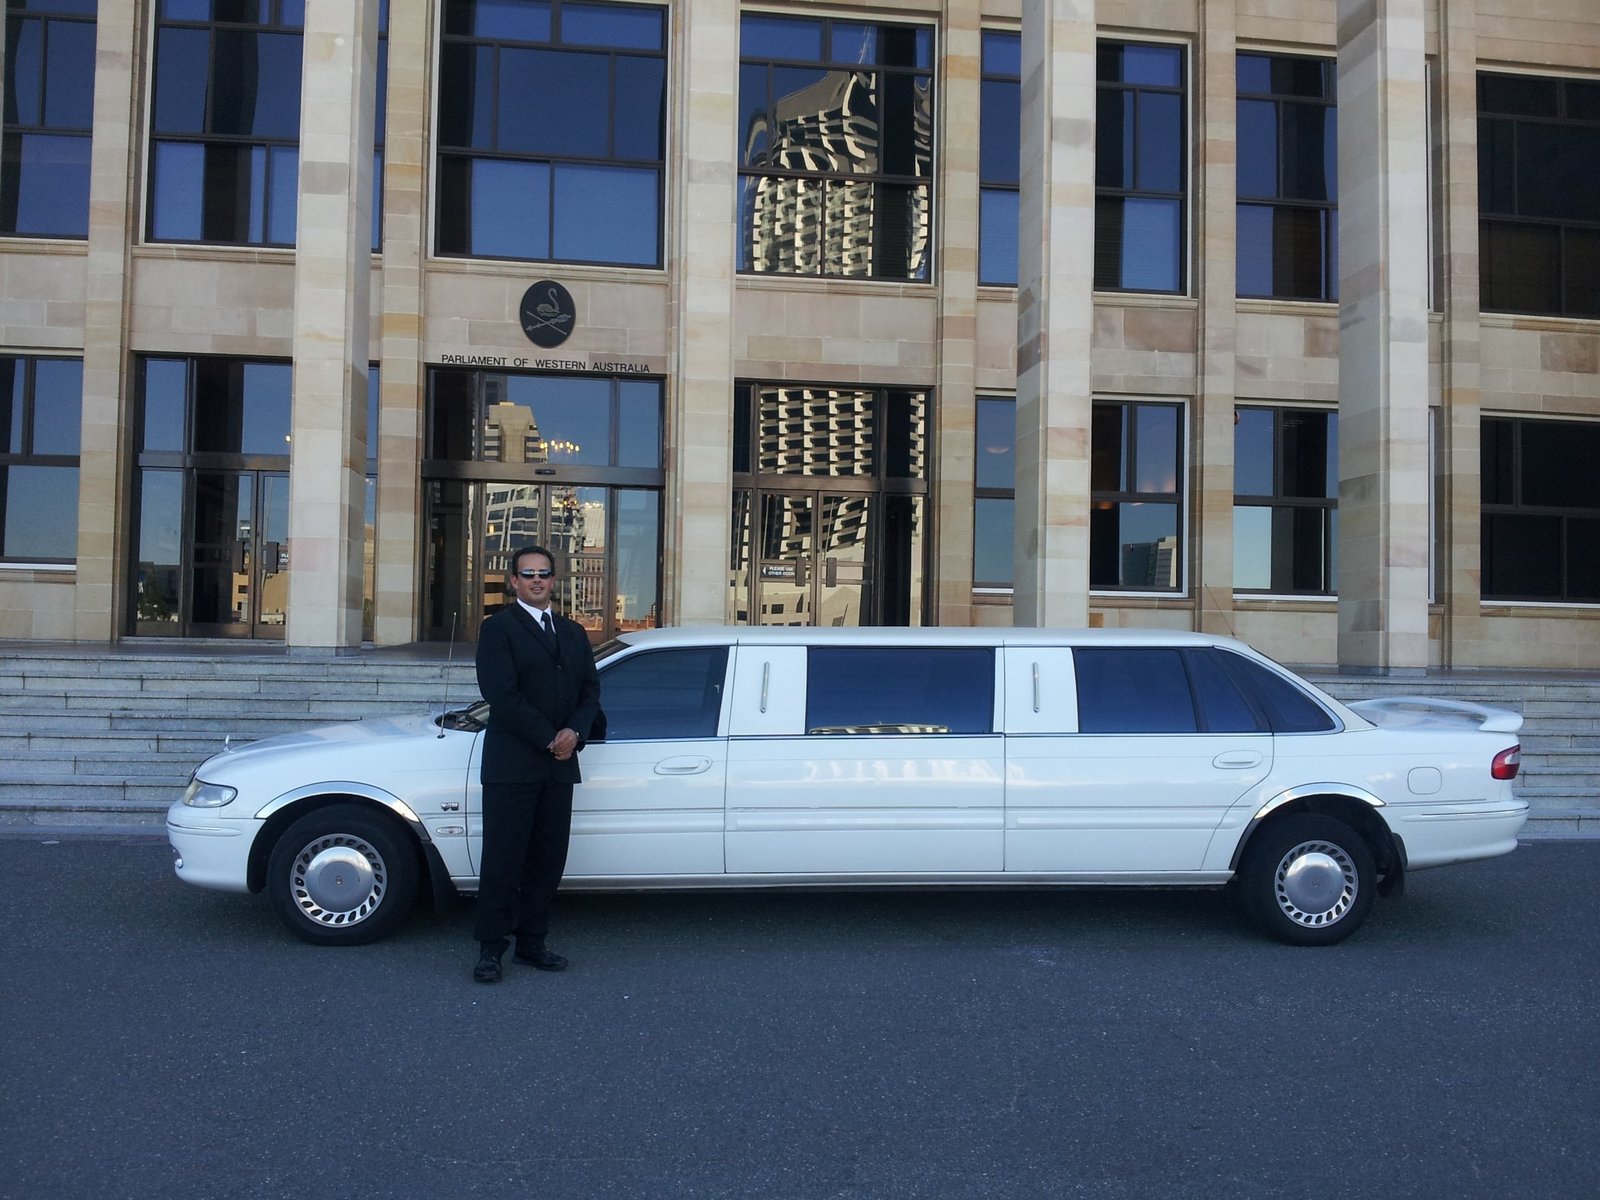 How to Find a Reputable Limo Service?